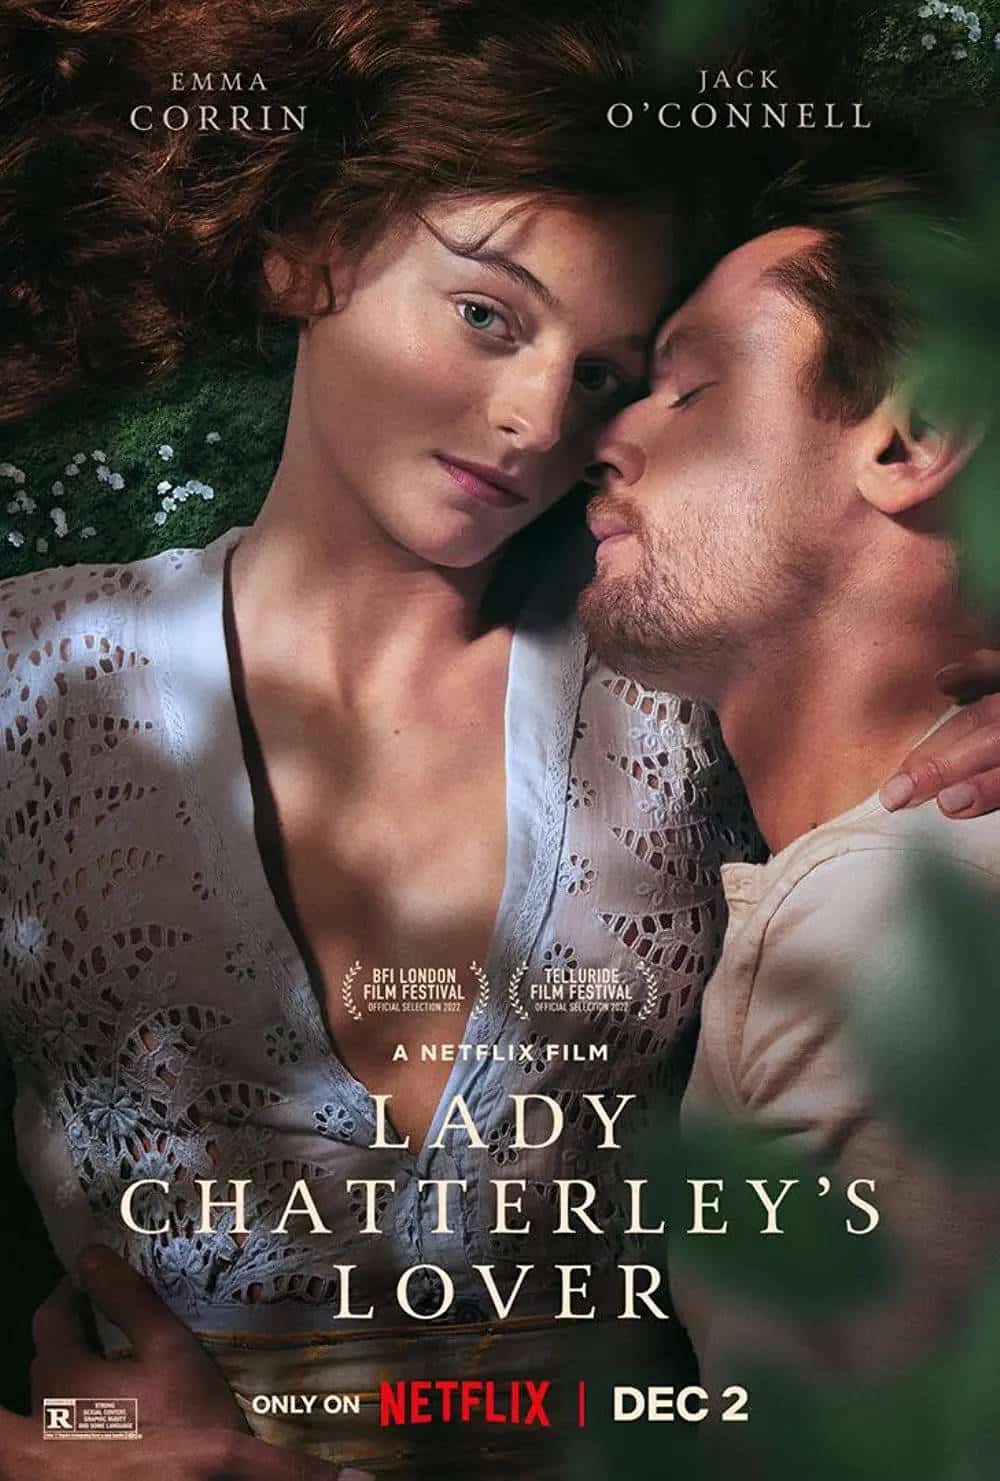 Lady Chatterley's Lover A Racy Period Romance (Early Review)